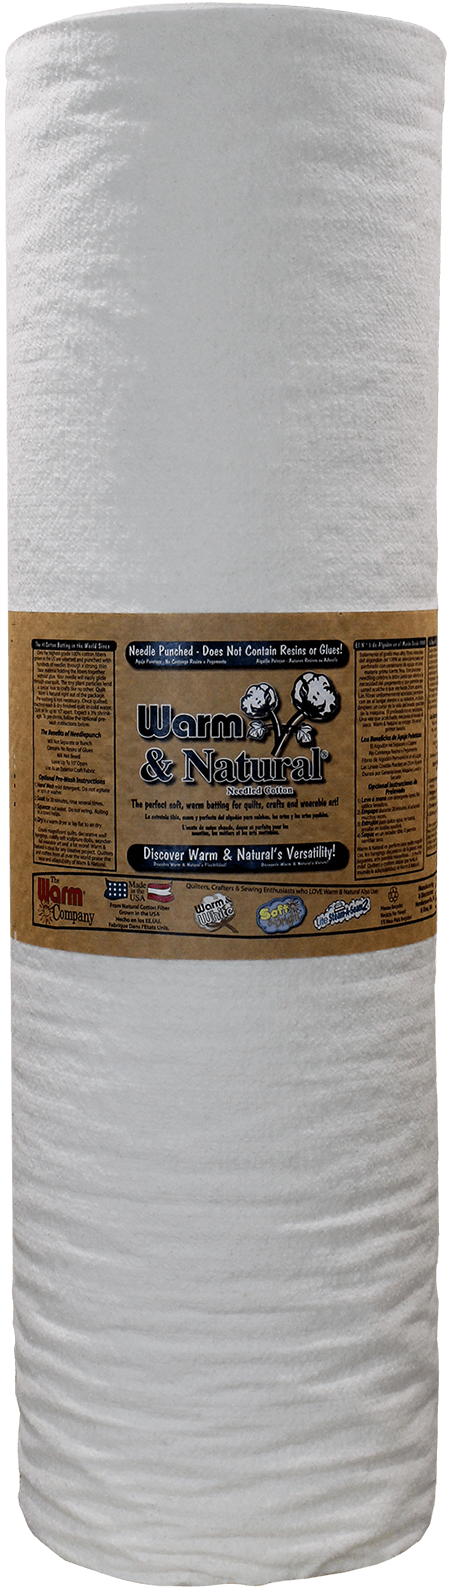 The Warm Company – Manufacturers of the Perfect, Soft, Warm Batting for  Quilts, Crafts Wearable Arts!